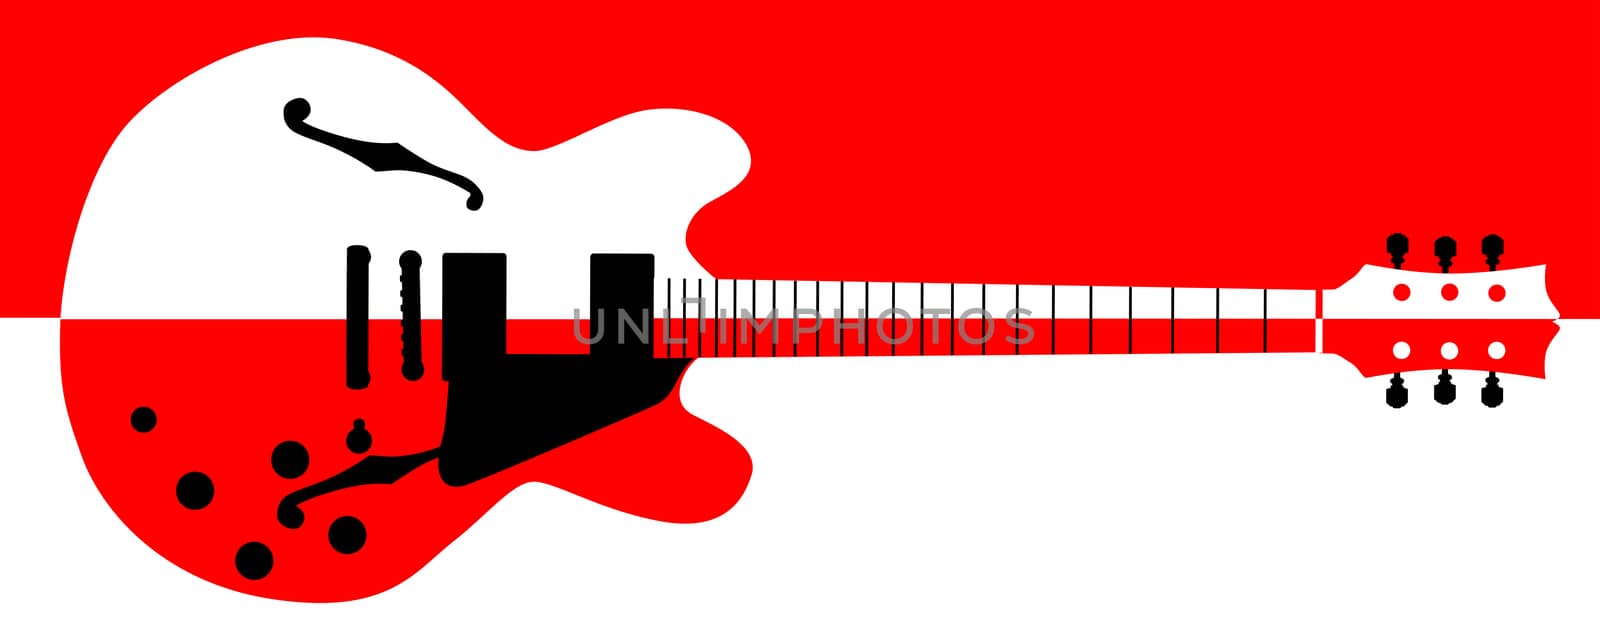 A semi acoustic type guitar split into red and white